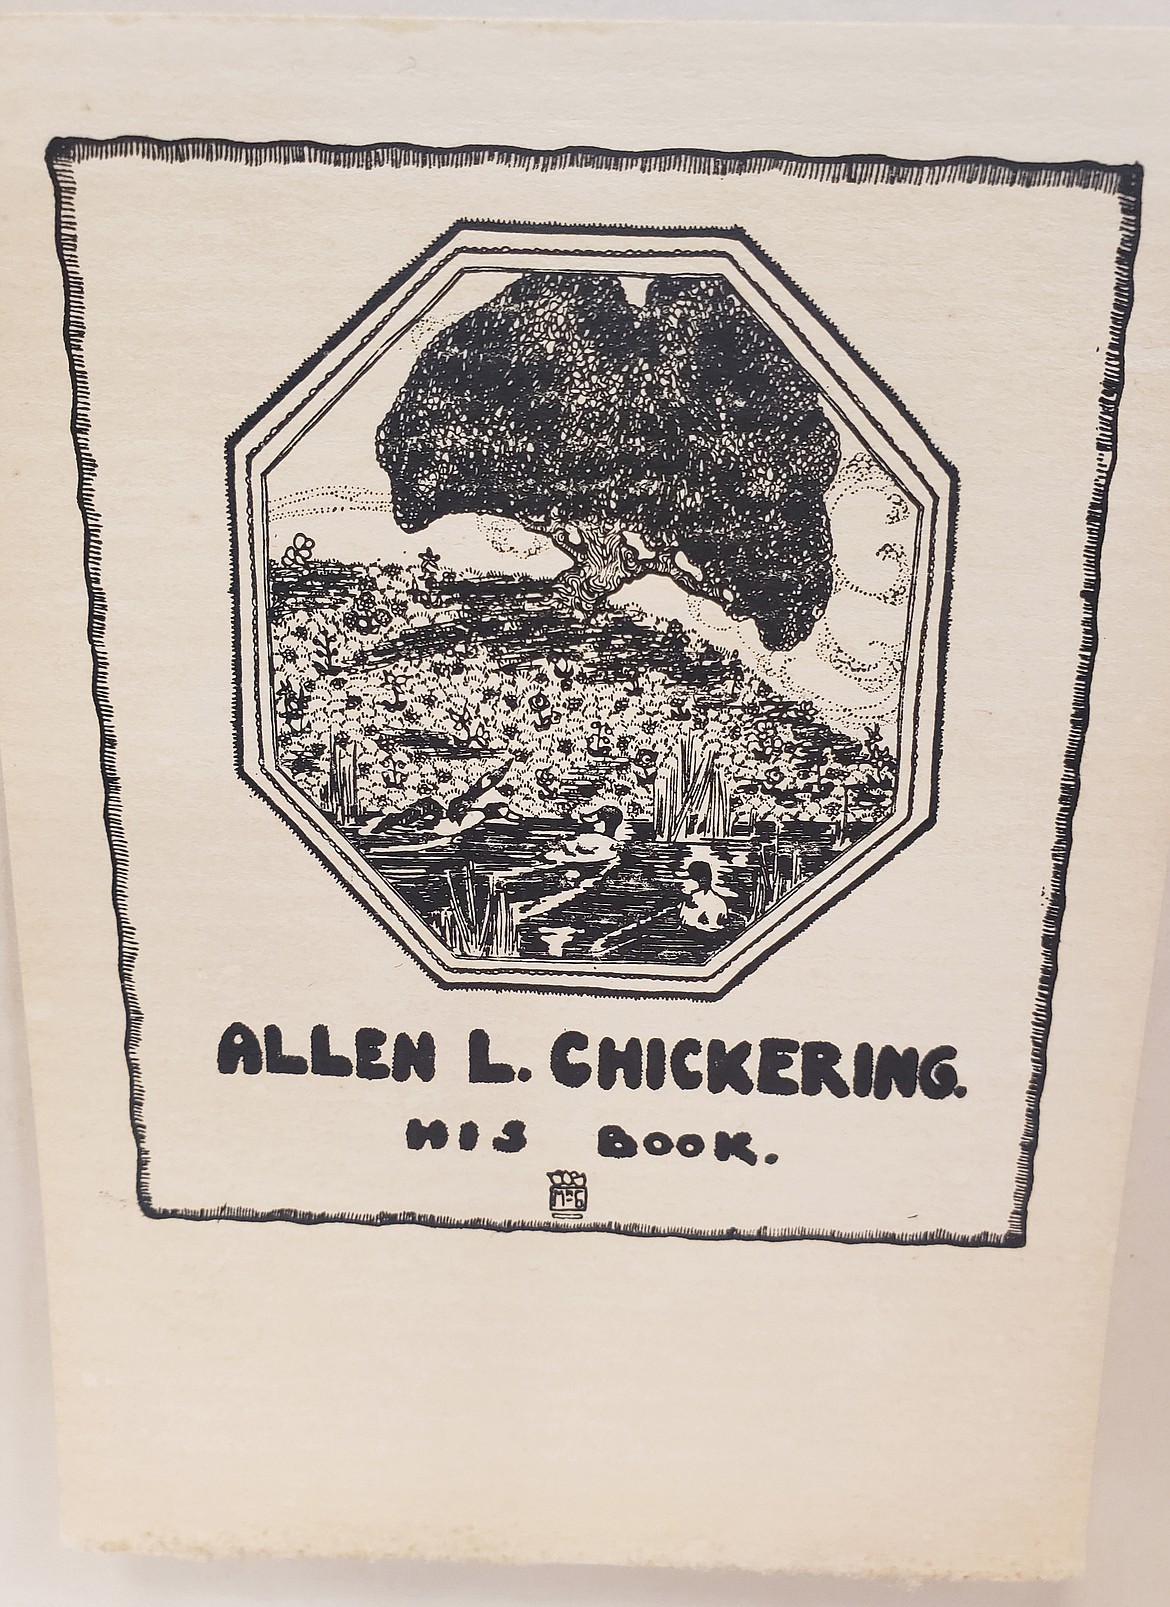 A bookplate affixed to one of the books in the Allen L. Chickering Collection at the FVCC library.